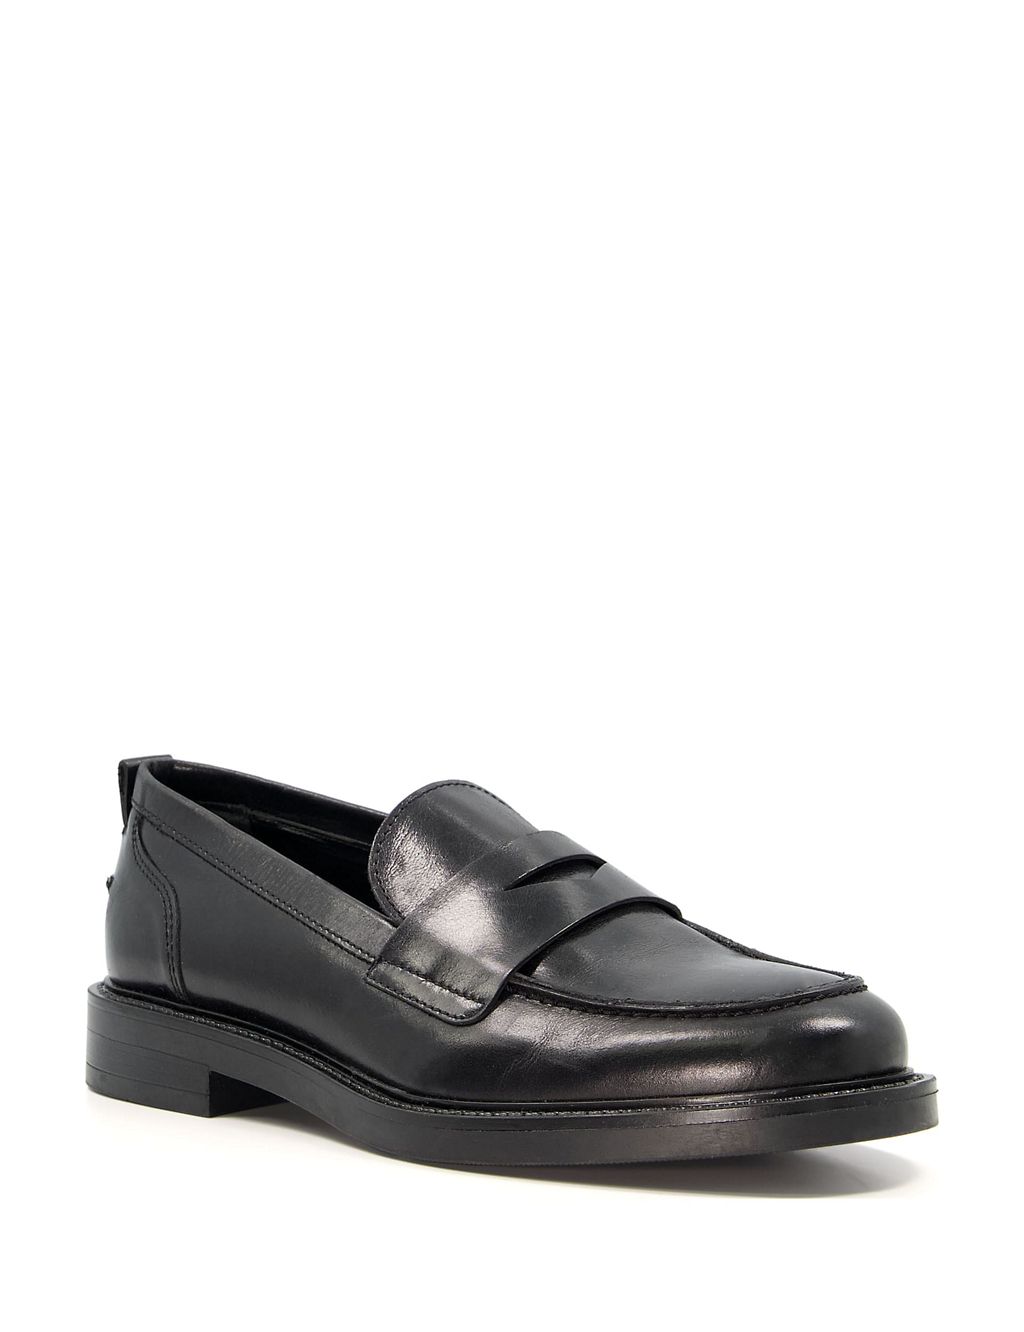 Leather Flat Loafers | Dune London | M&S